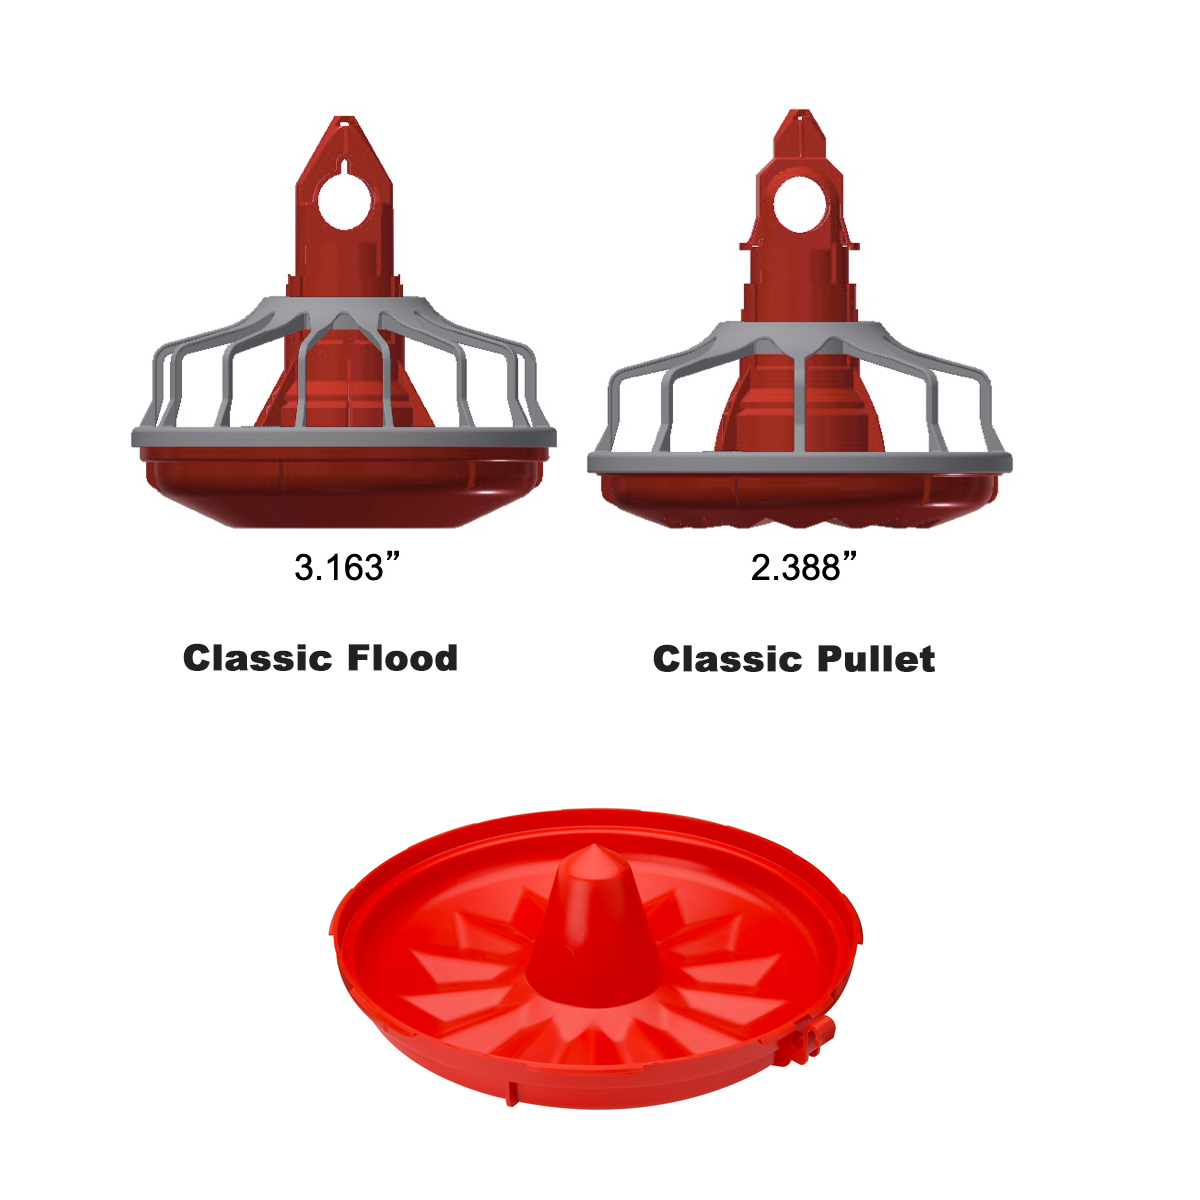 Designed specially for pullet feeding, the Classic Pullets features a low profile for greater accessibly and segmented bottom for even distribution.